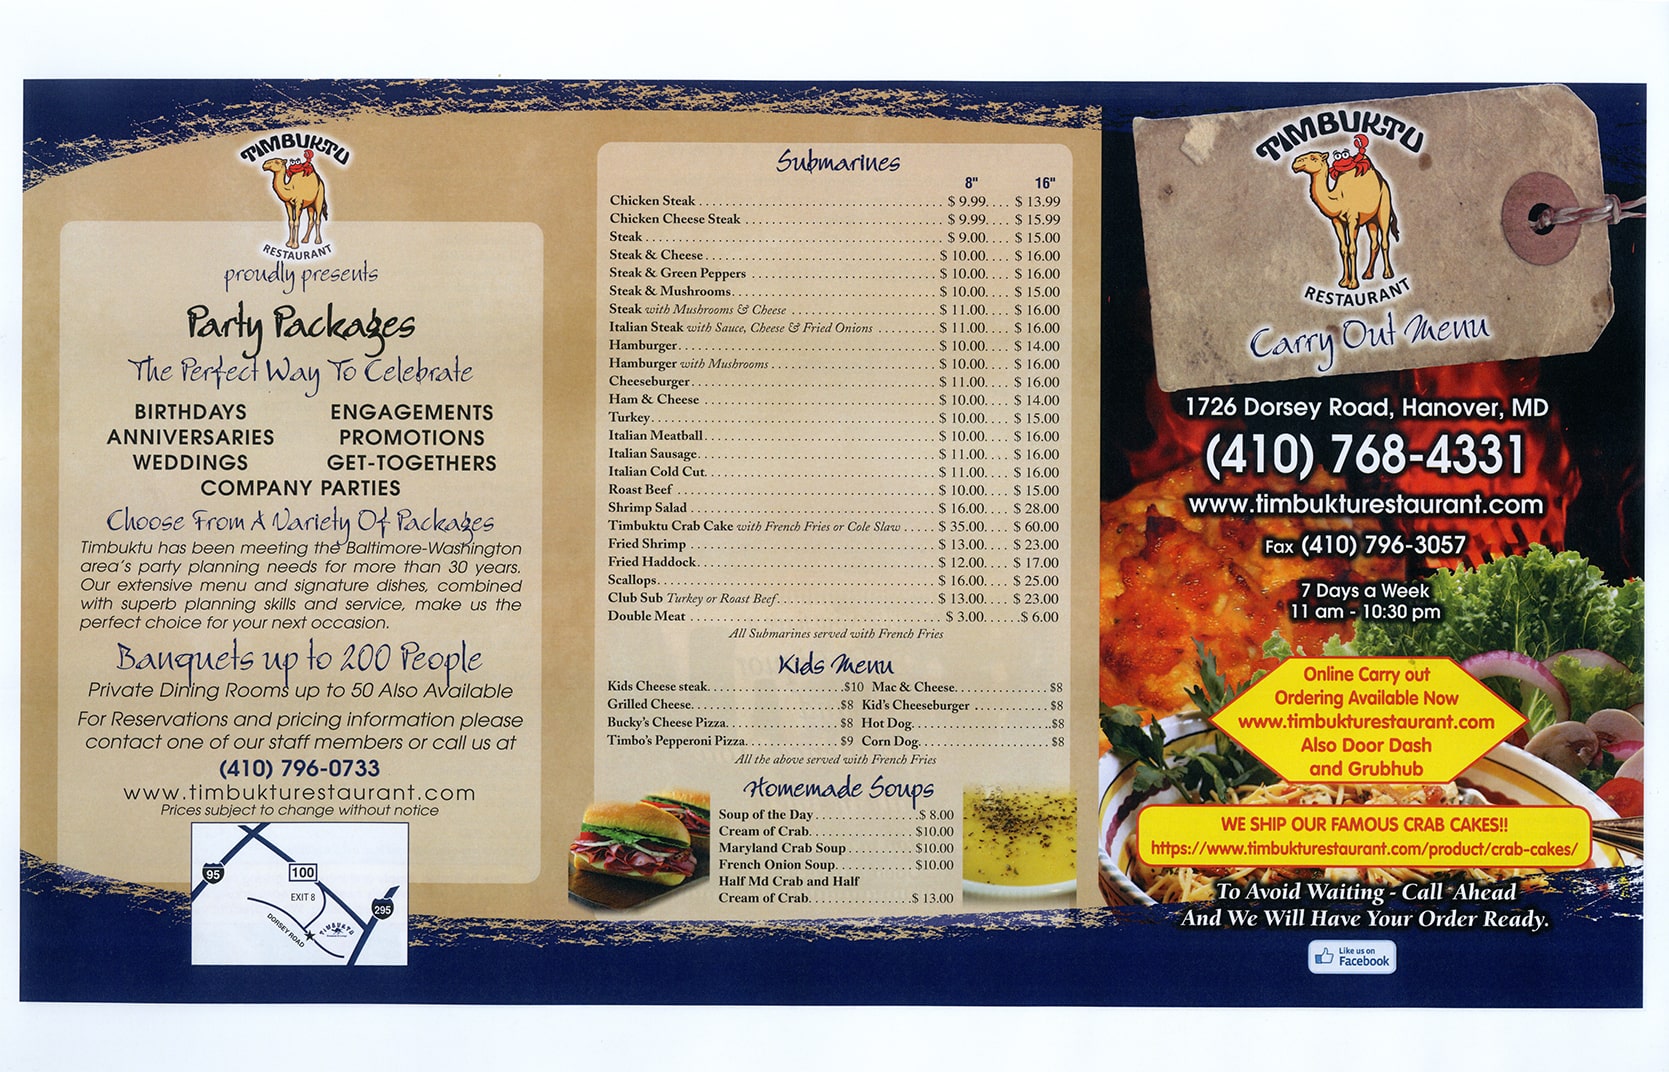 Timbuktu Restaurant Carry Out Menu Page 1 - Revised 111021